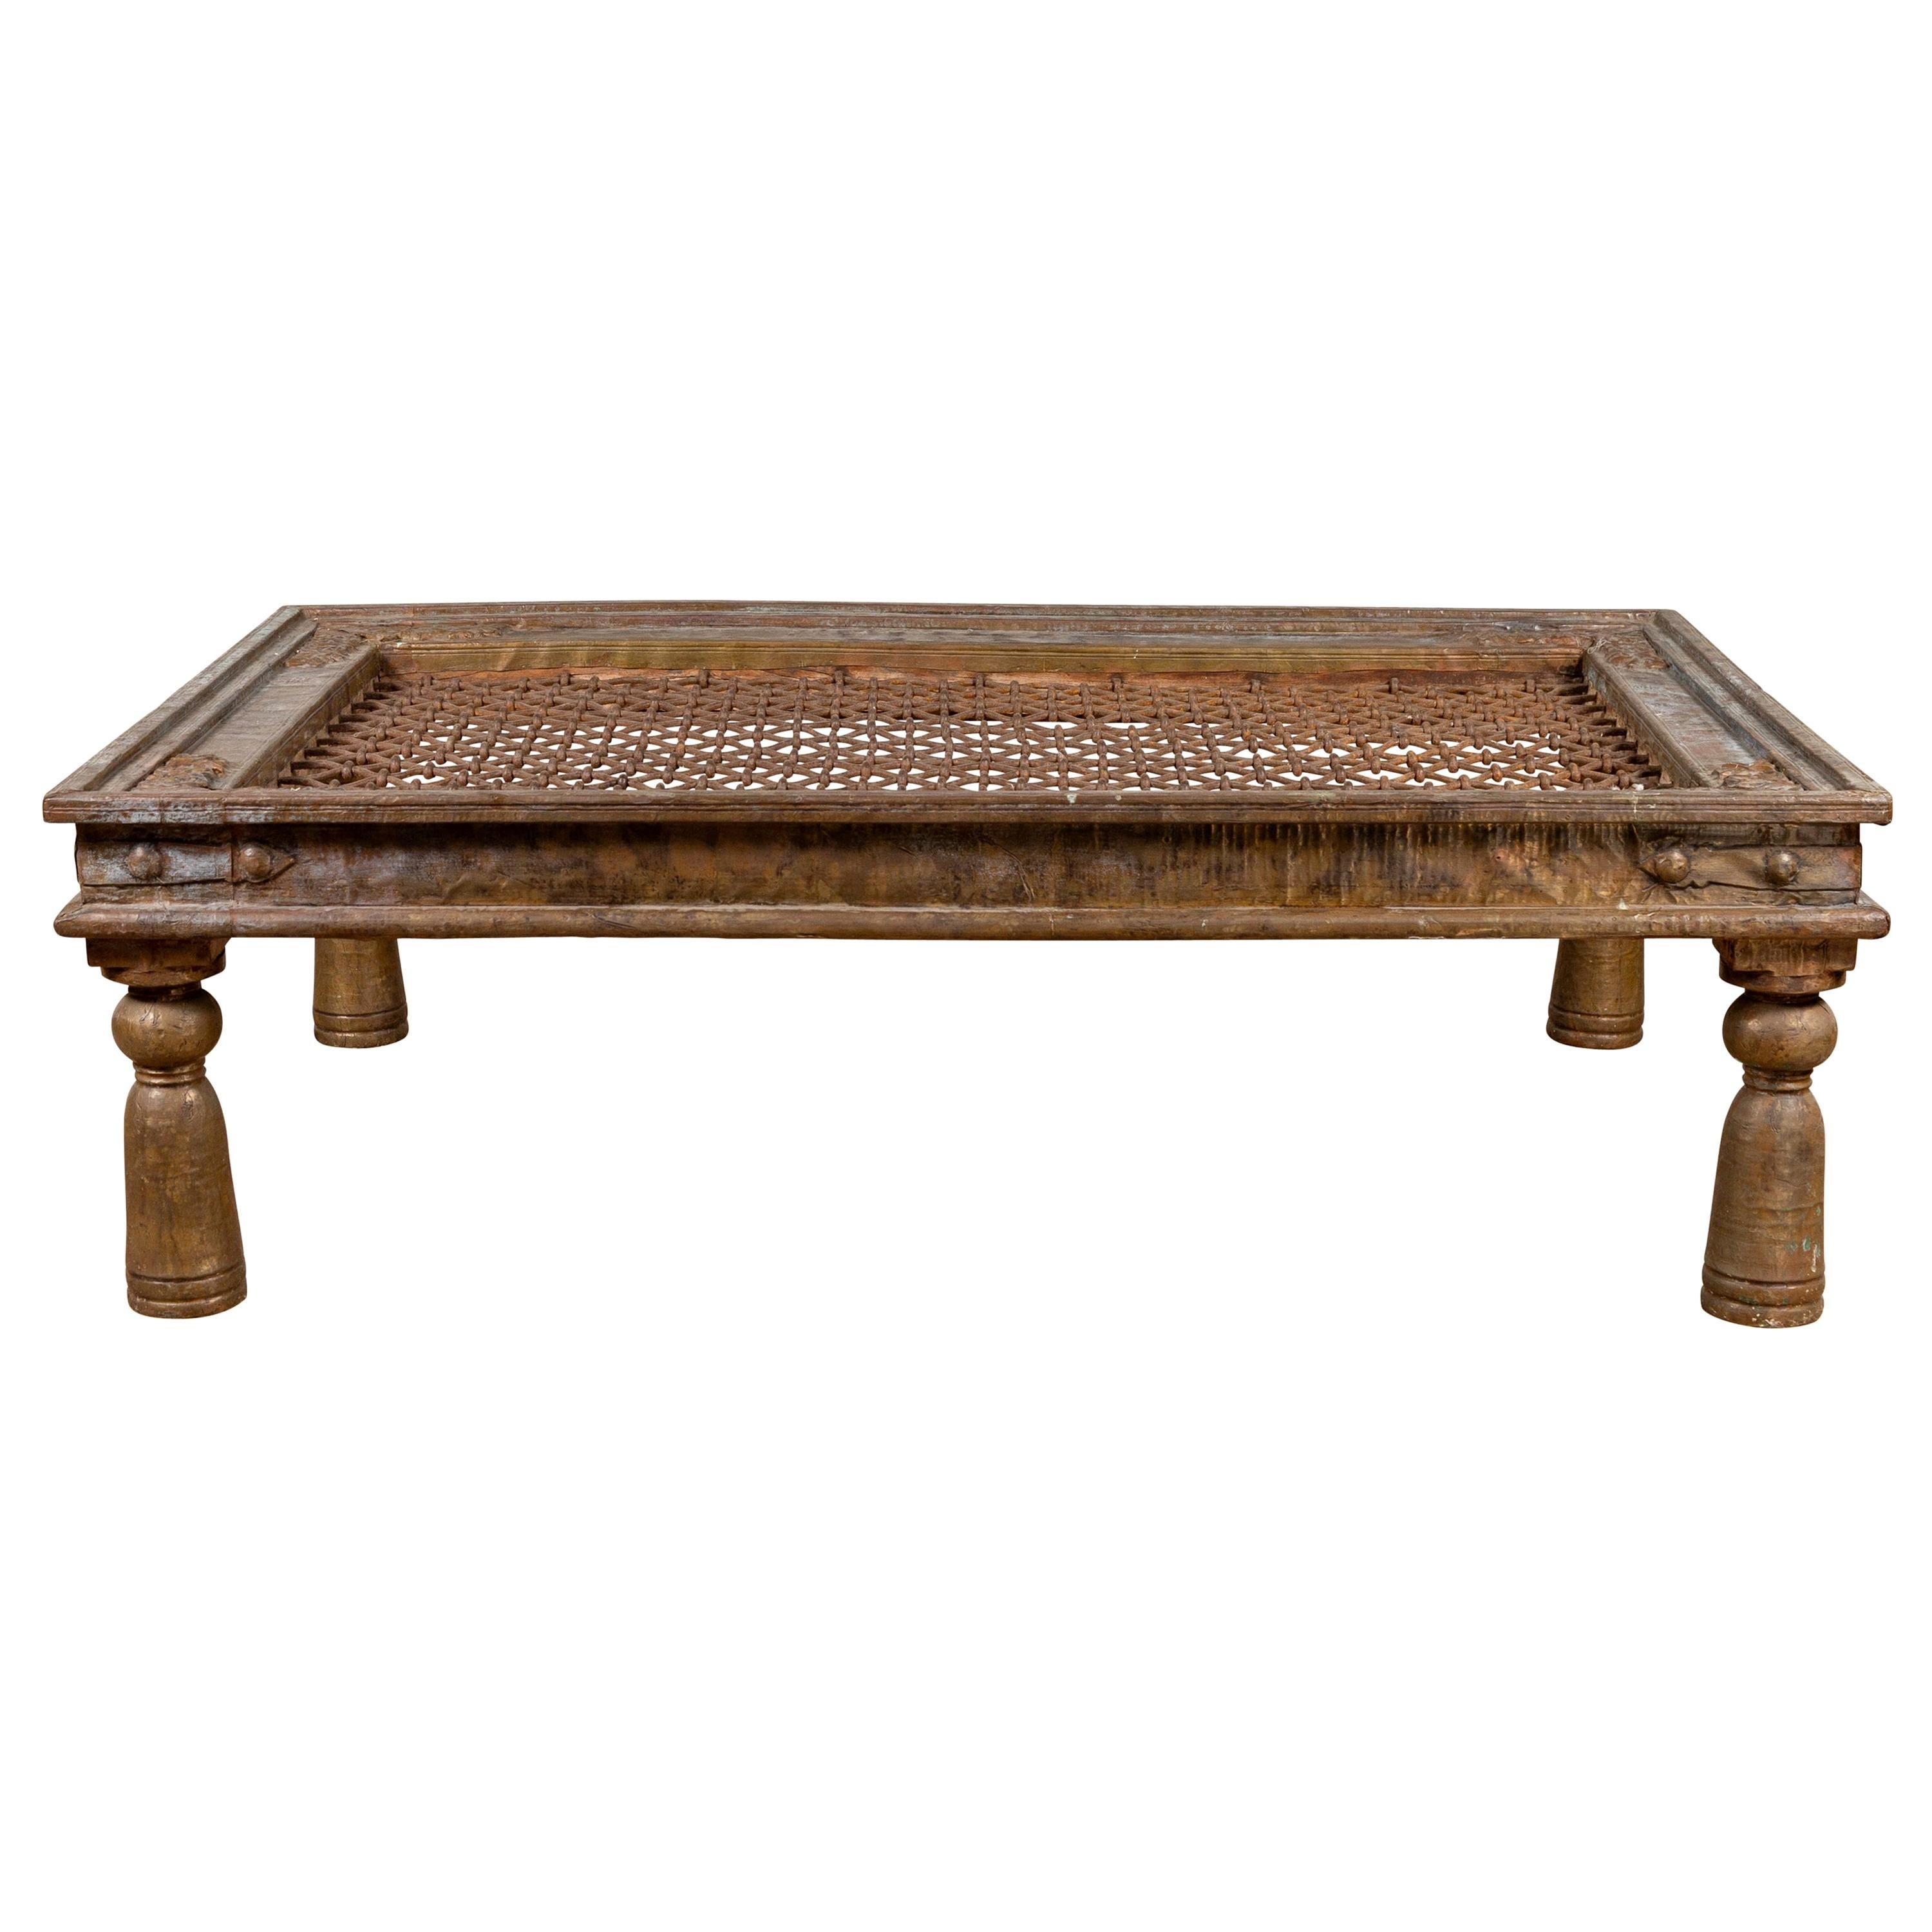 Antique Indian Window Grate Made into a Coffee Table with Metal Sheathing